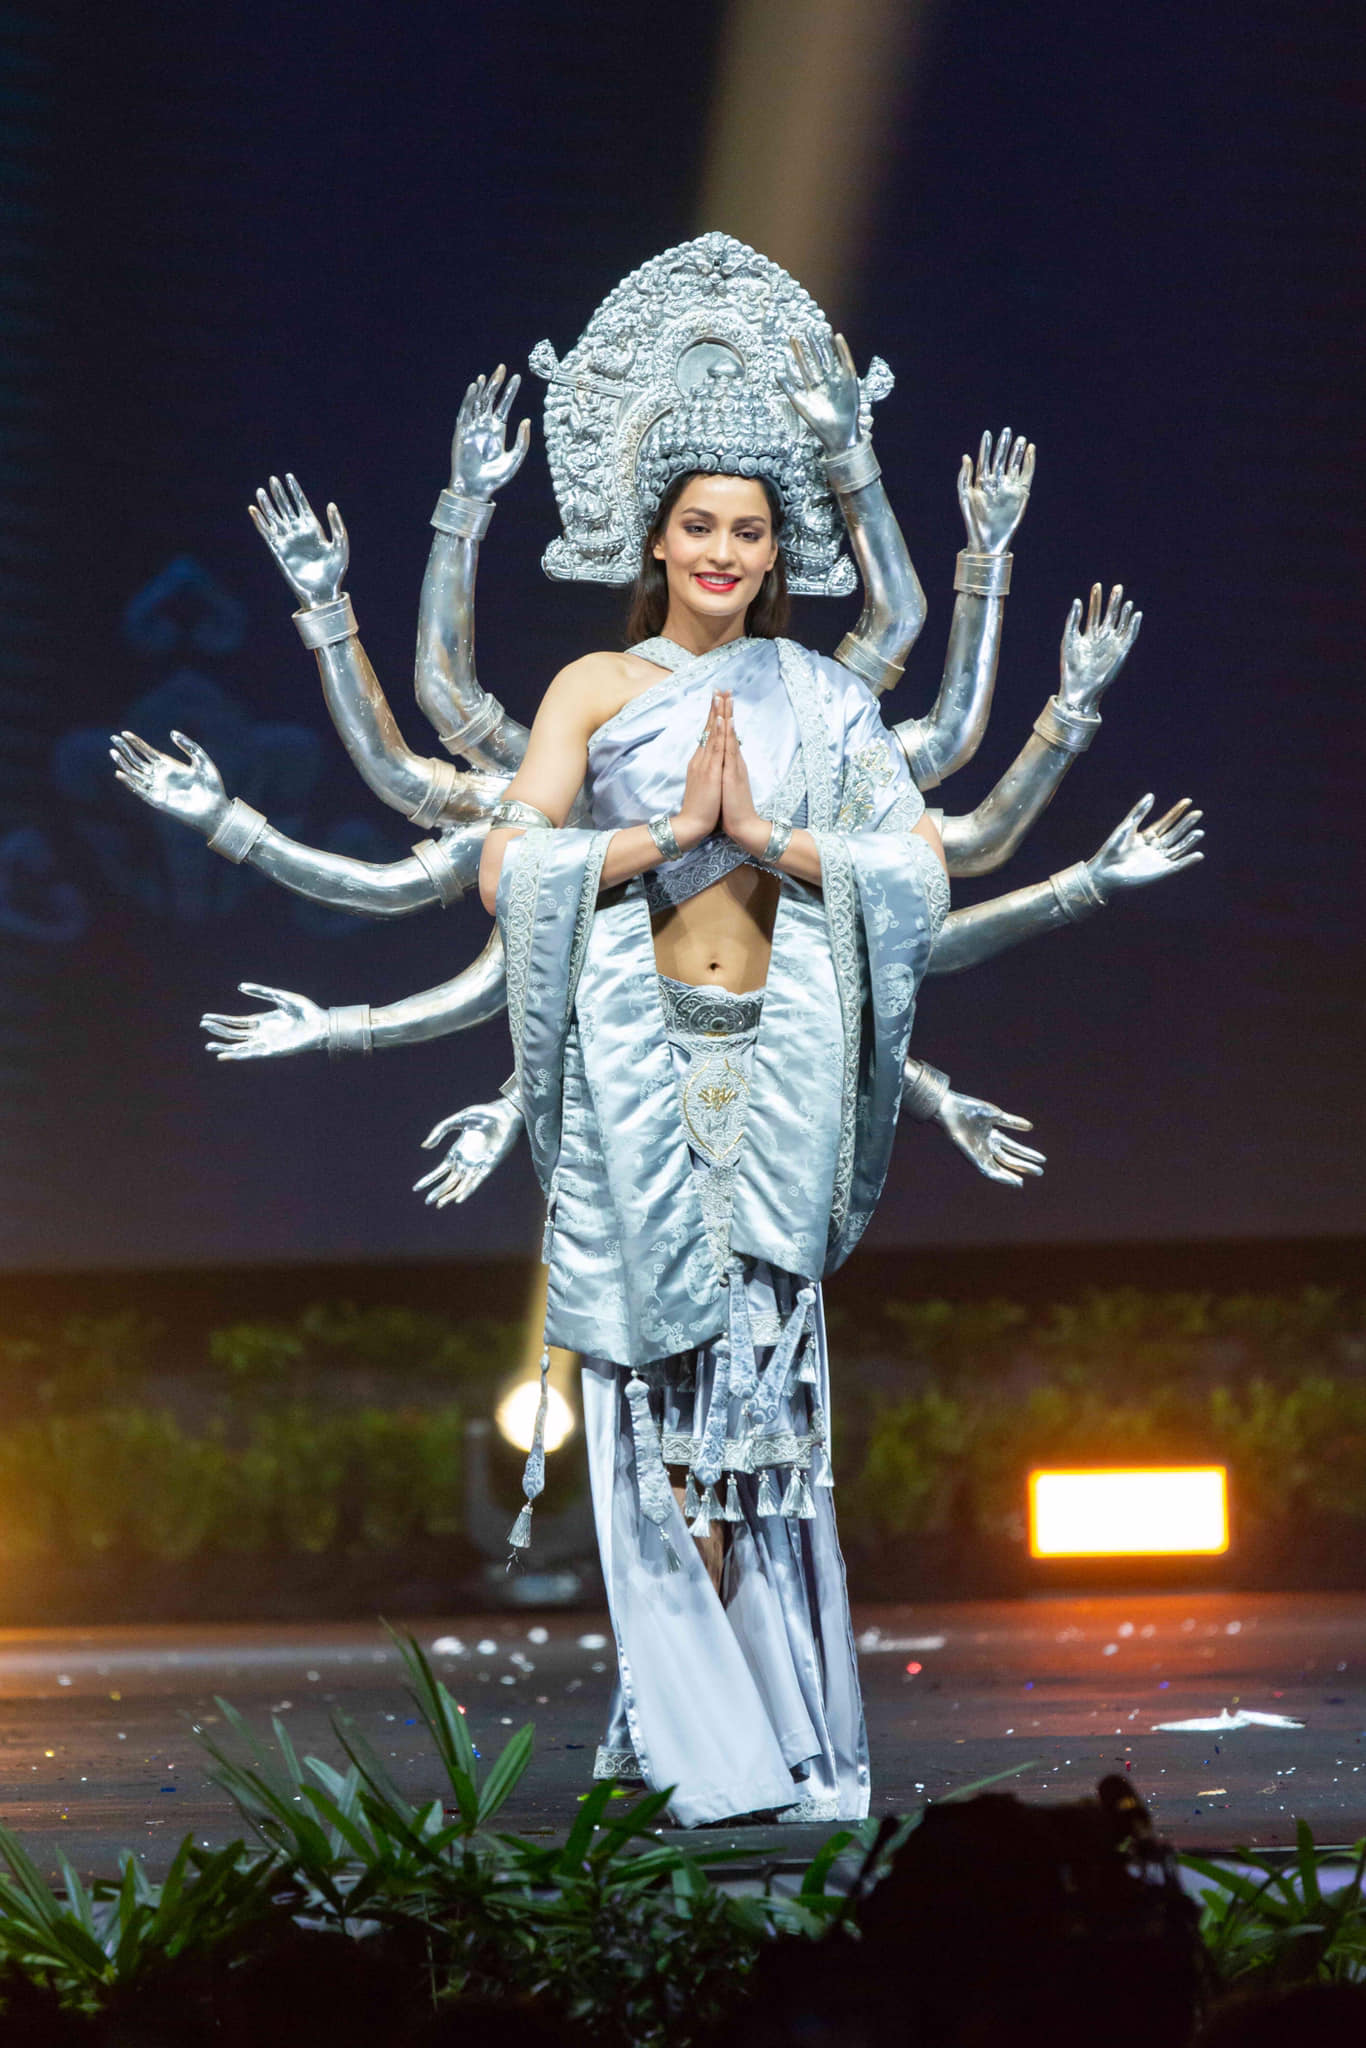 Without Much Fanfare Manita Makes To Top 10 In Miss Universe 2018